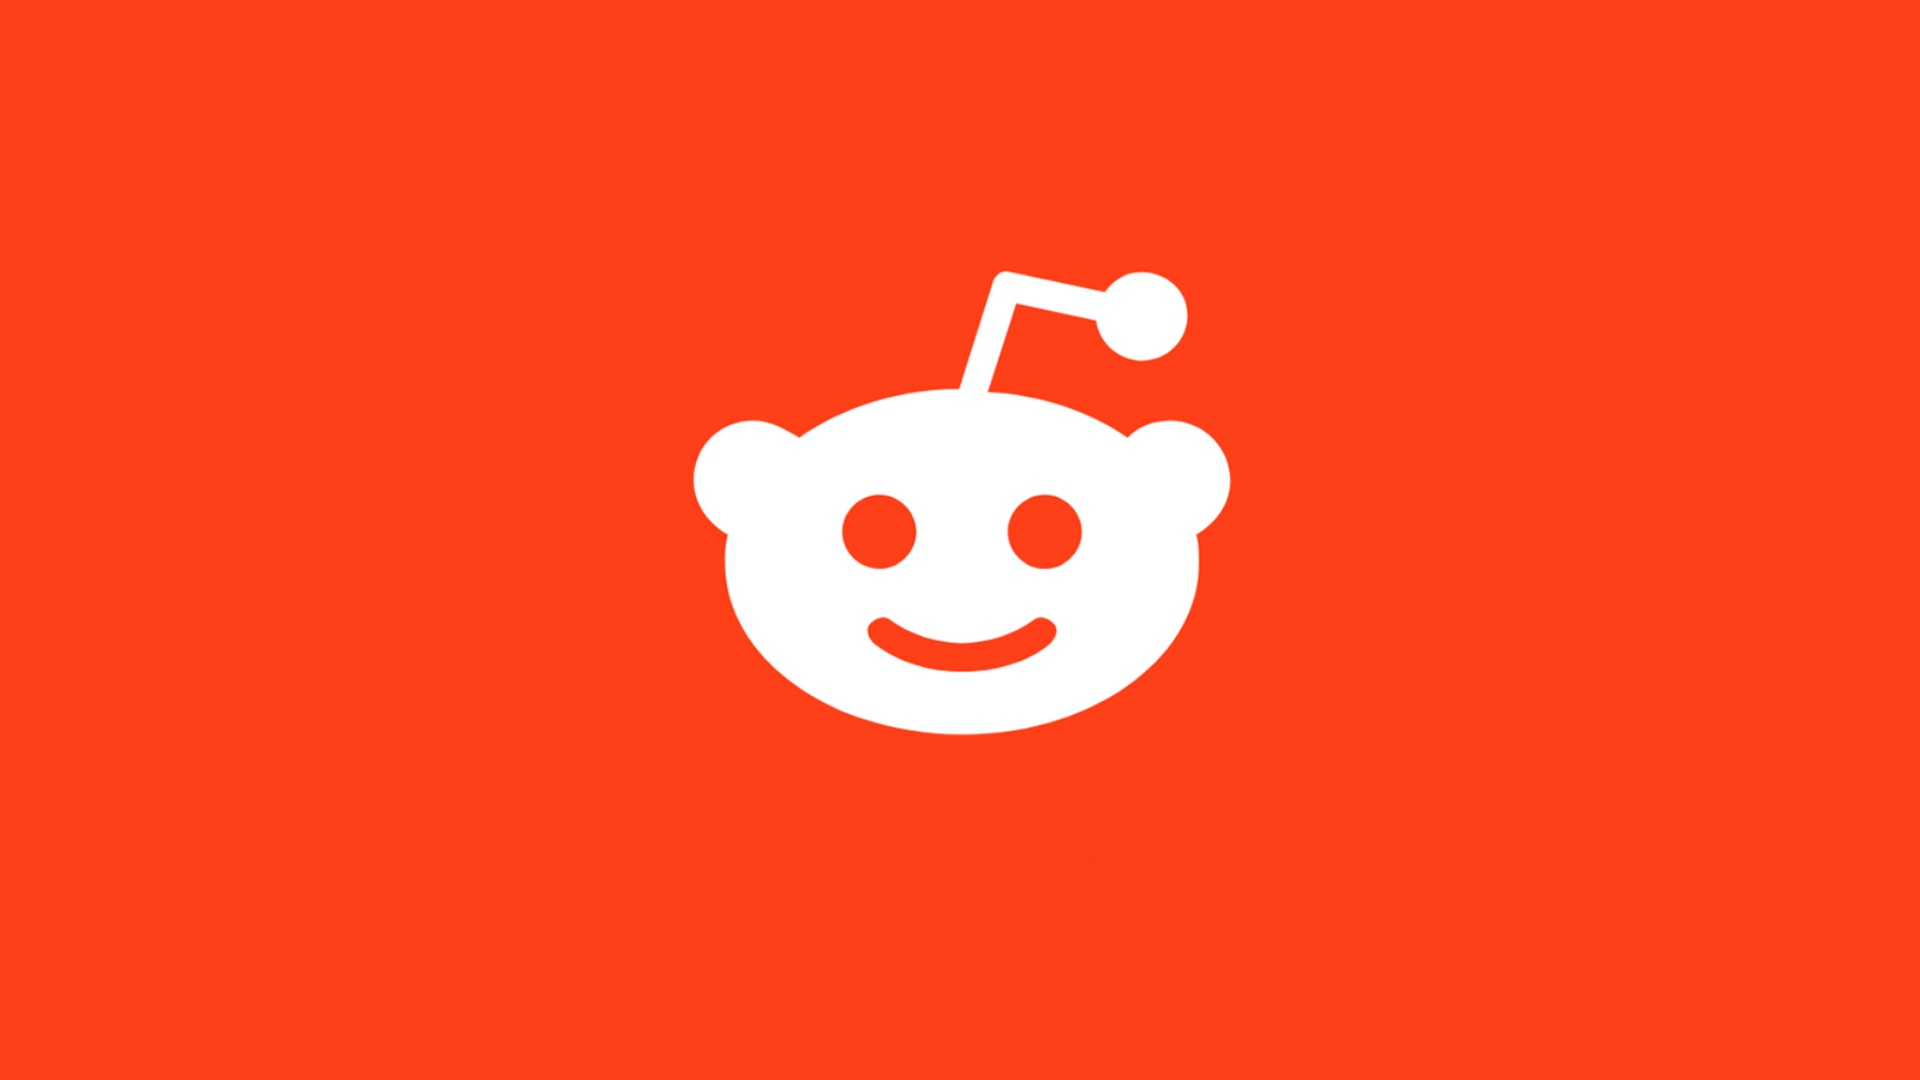 Reddit bans impersonation on its site, but still allows for satire